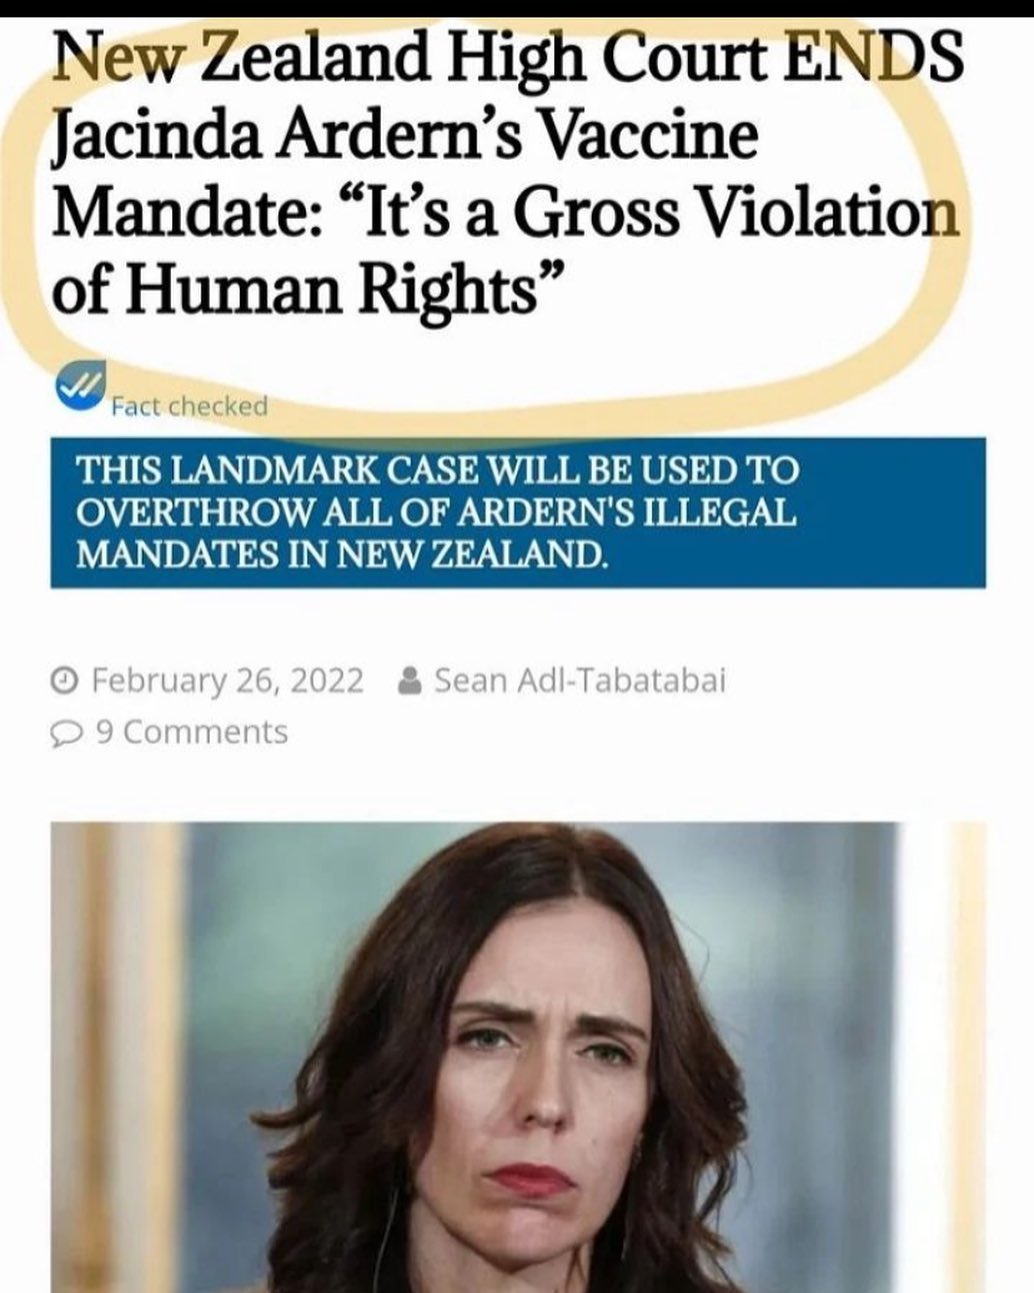 You are currently viewing New Zealand High Court ENDS Jacinda Ardern’s Vaccine Mandate: “It’s a Gross Violation of Human Rights”